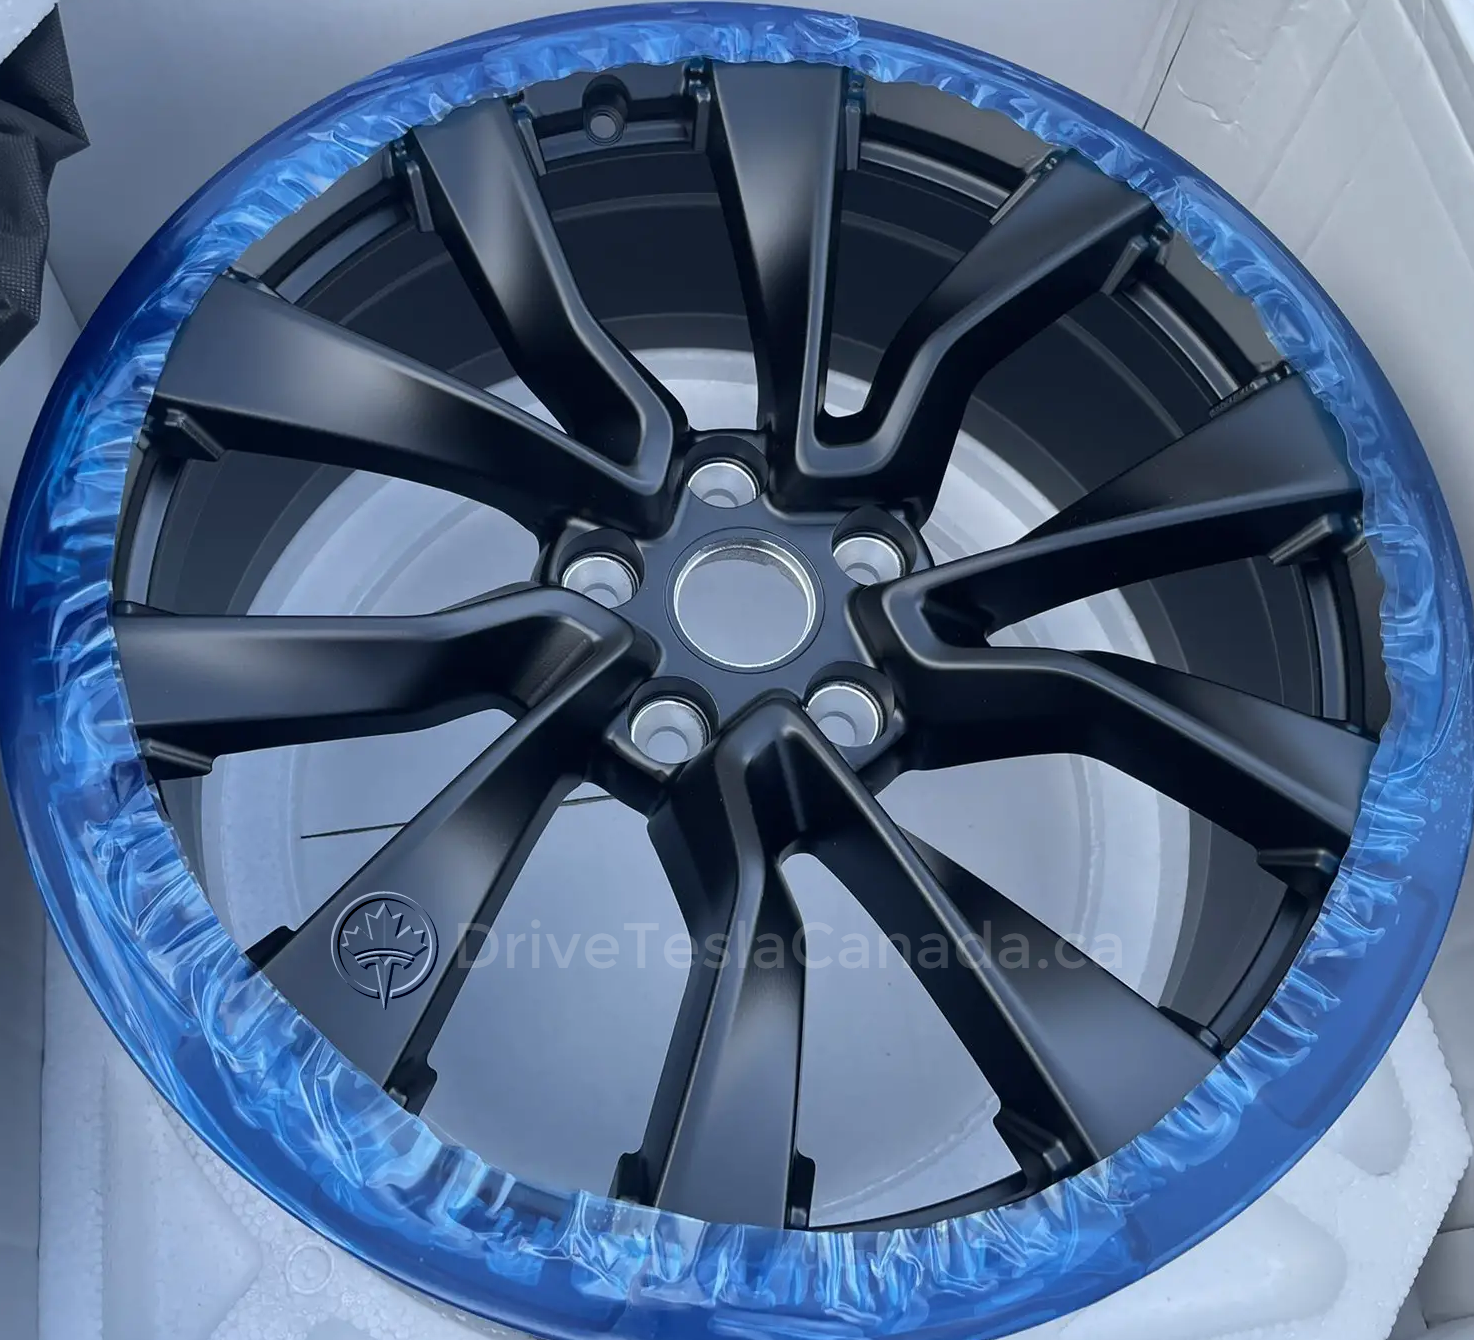 New Tesla Model 3 (Highland) 18'' Photon Wheels with cover removed